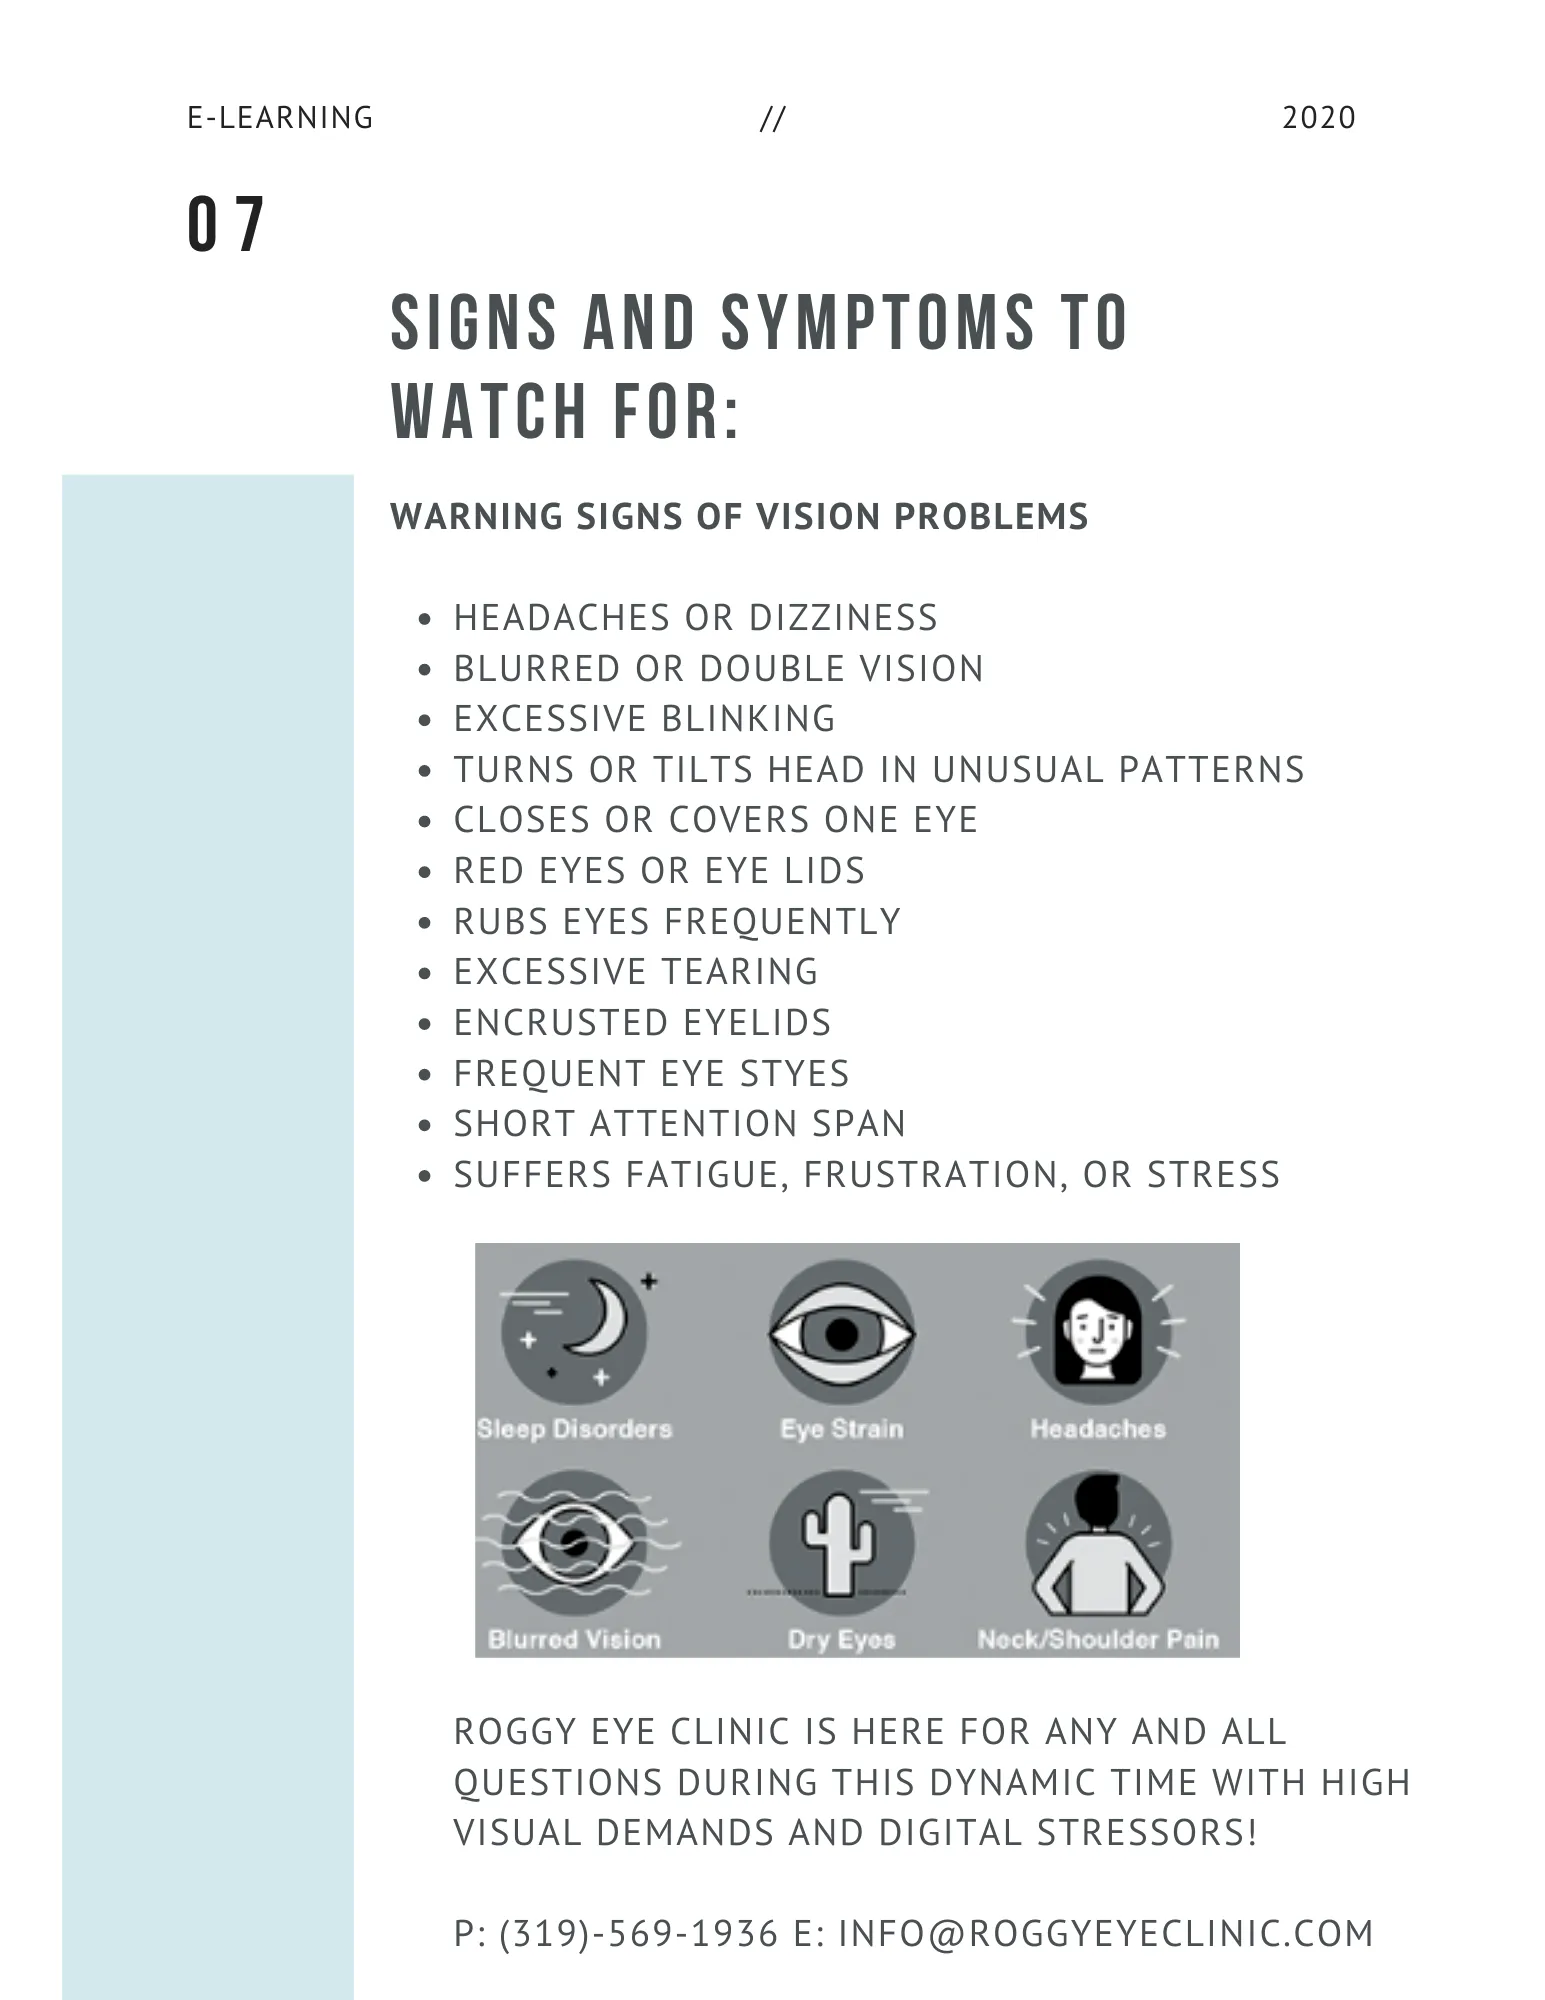 Signs and Symptoms to Watch For